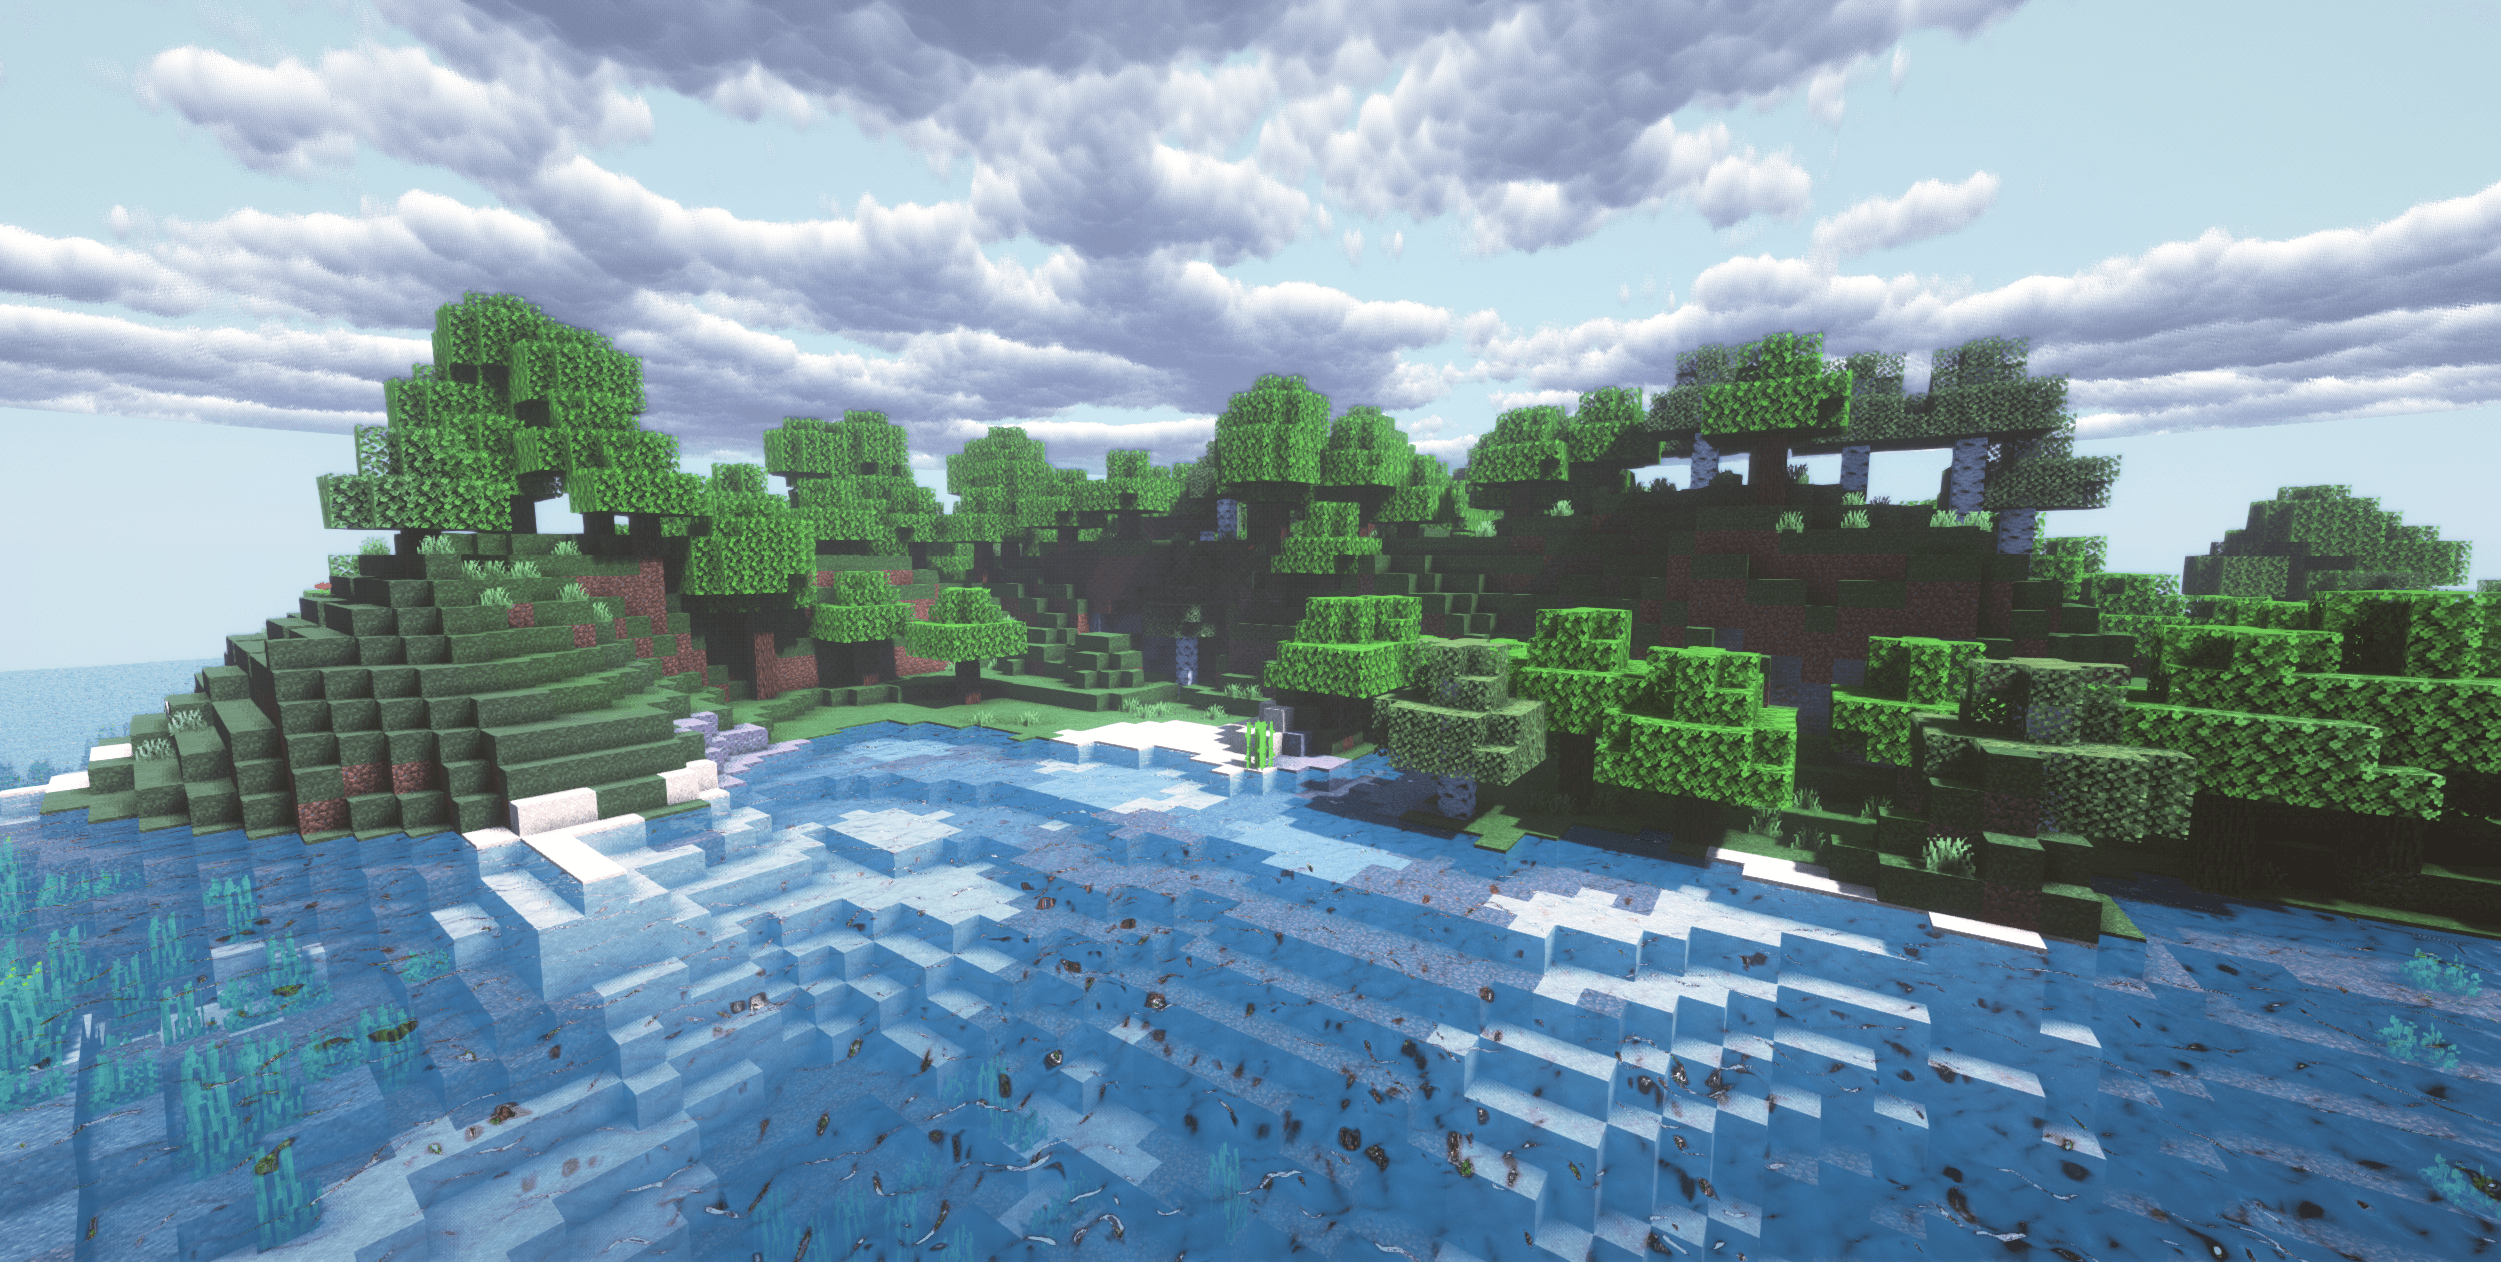 Old Lighting & Water - Minecraft Resource Packs - CurseForge